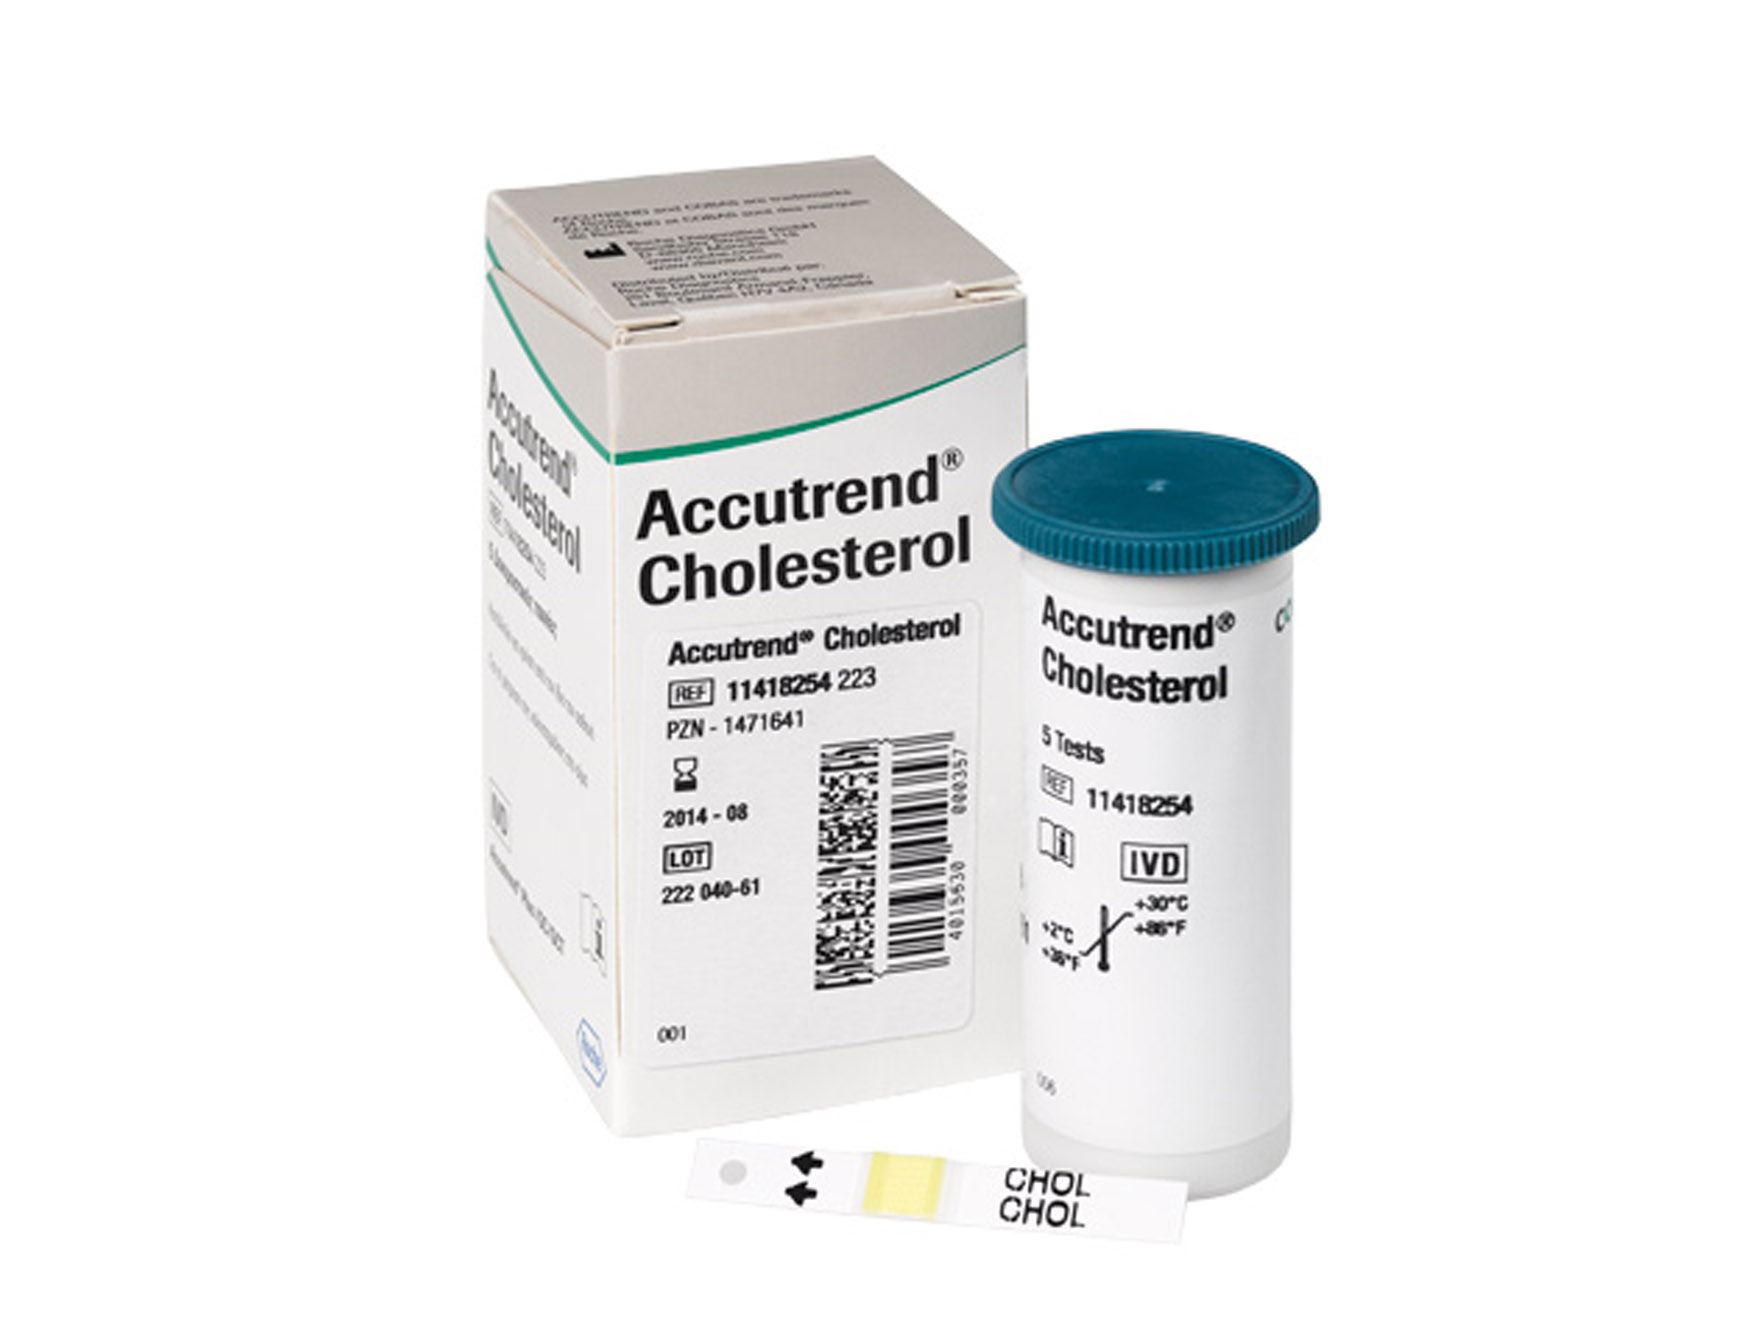 Accutrend Cholesterol - teststrips - 1 x 25 st